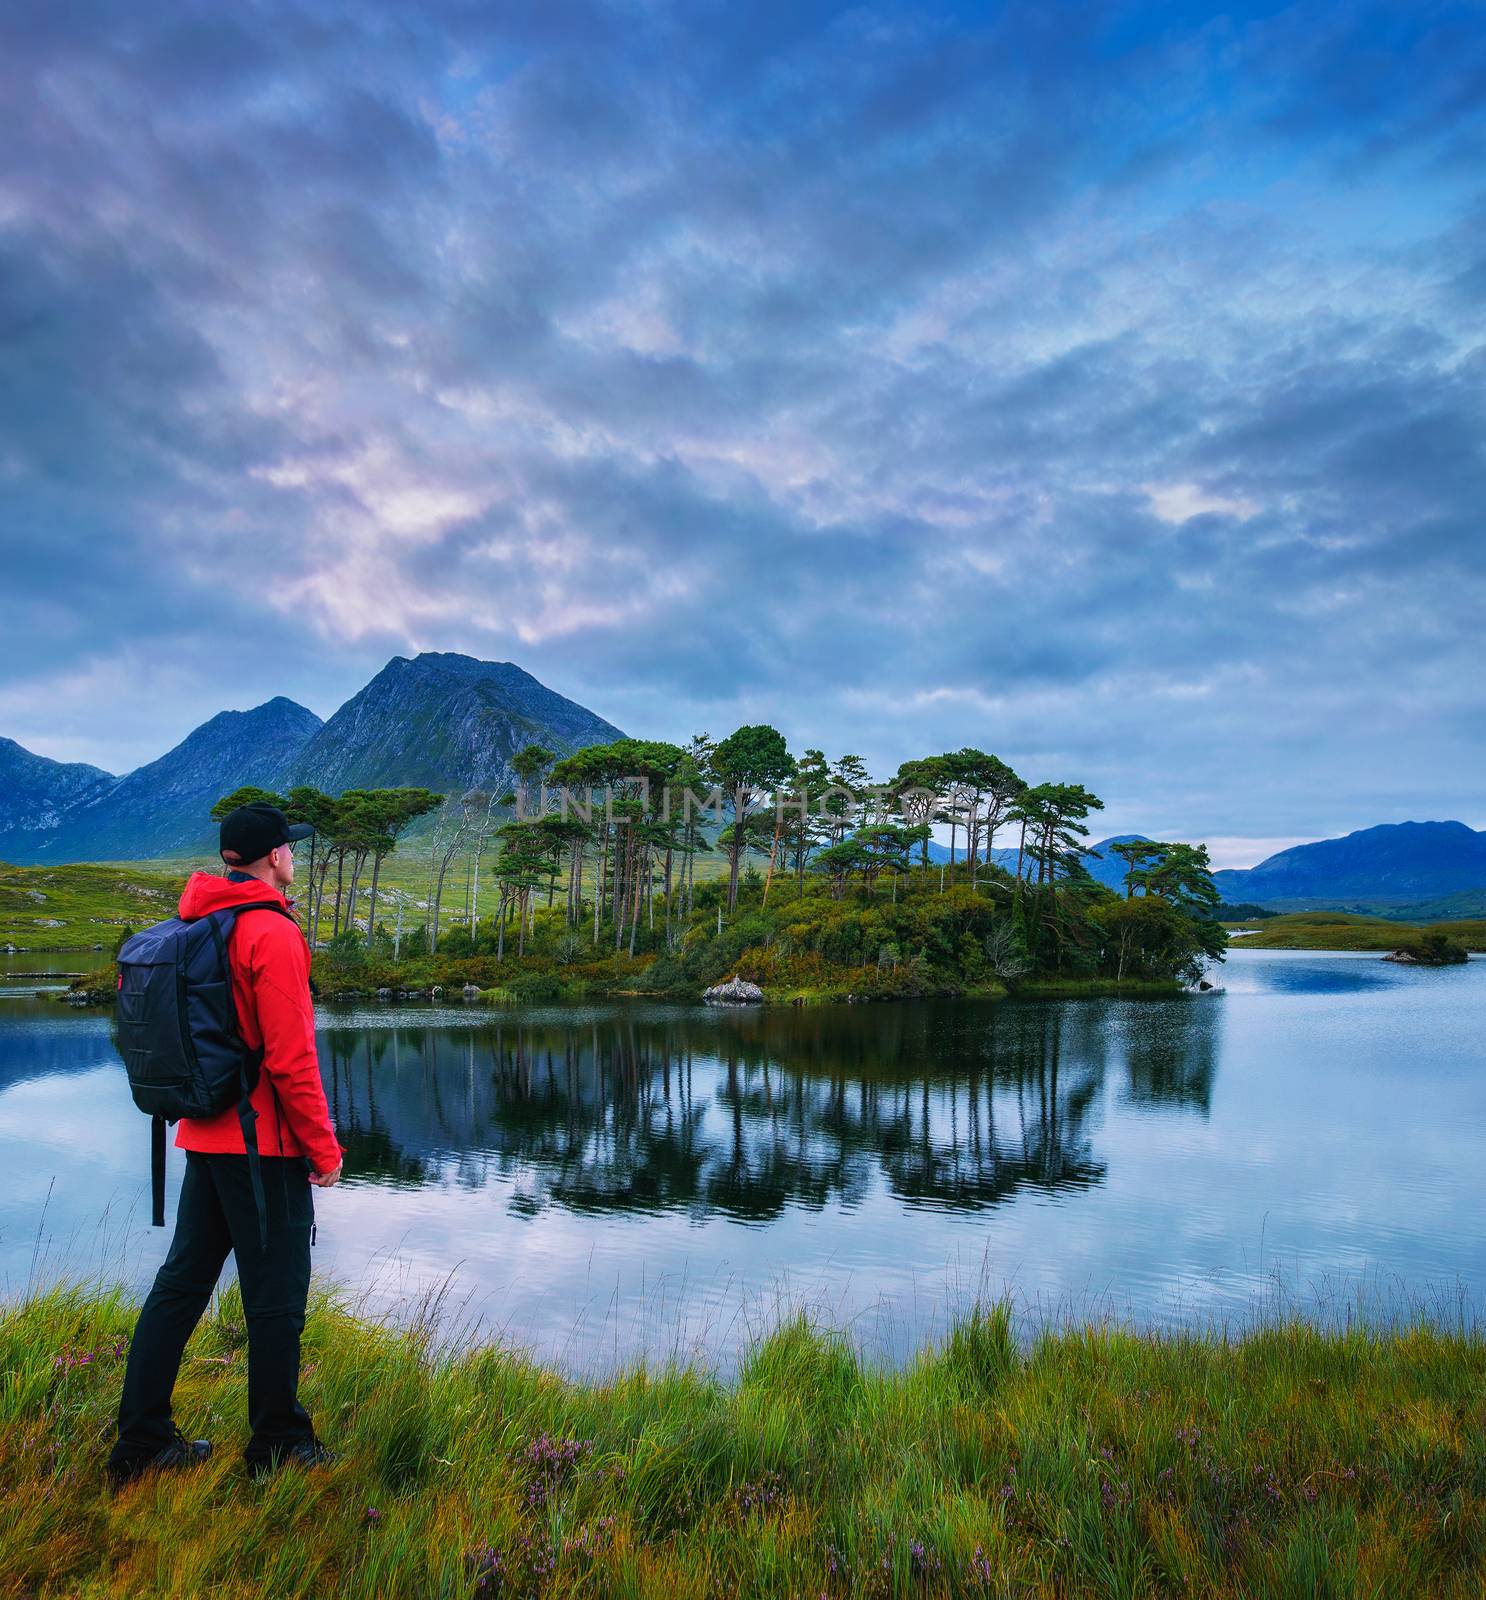 Young hiker at the Pine Island in Derryclare Lough by nickfox